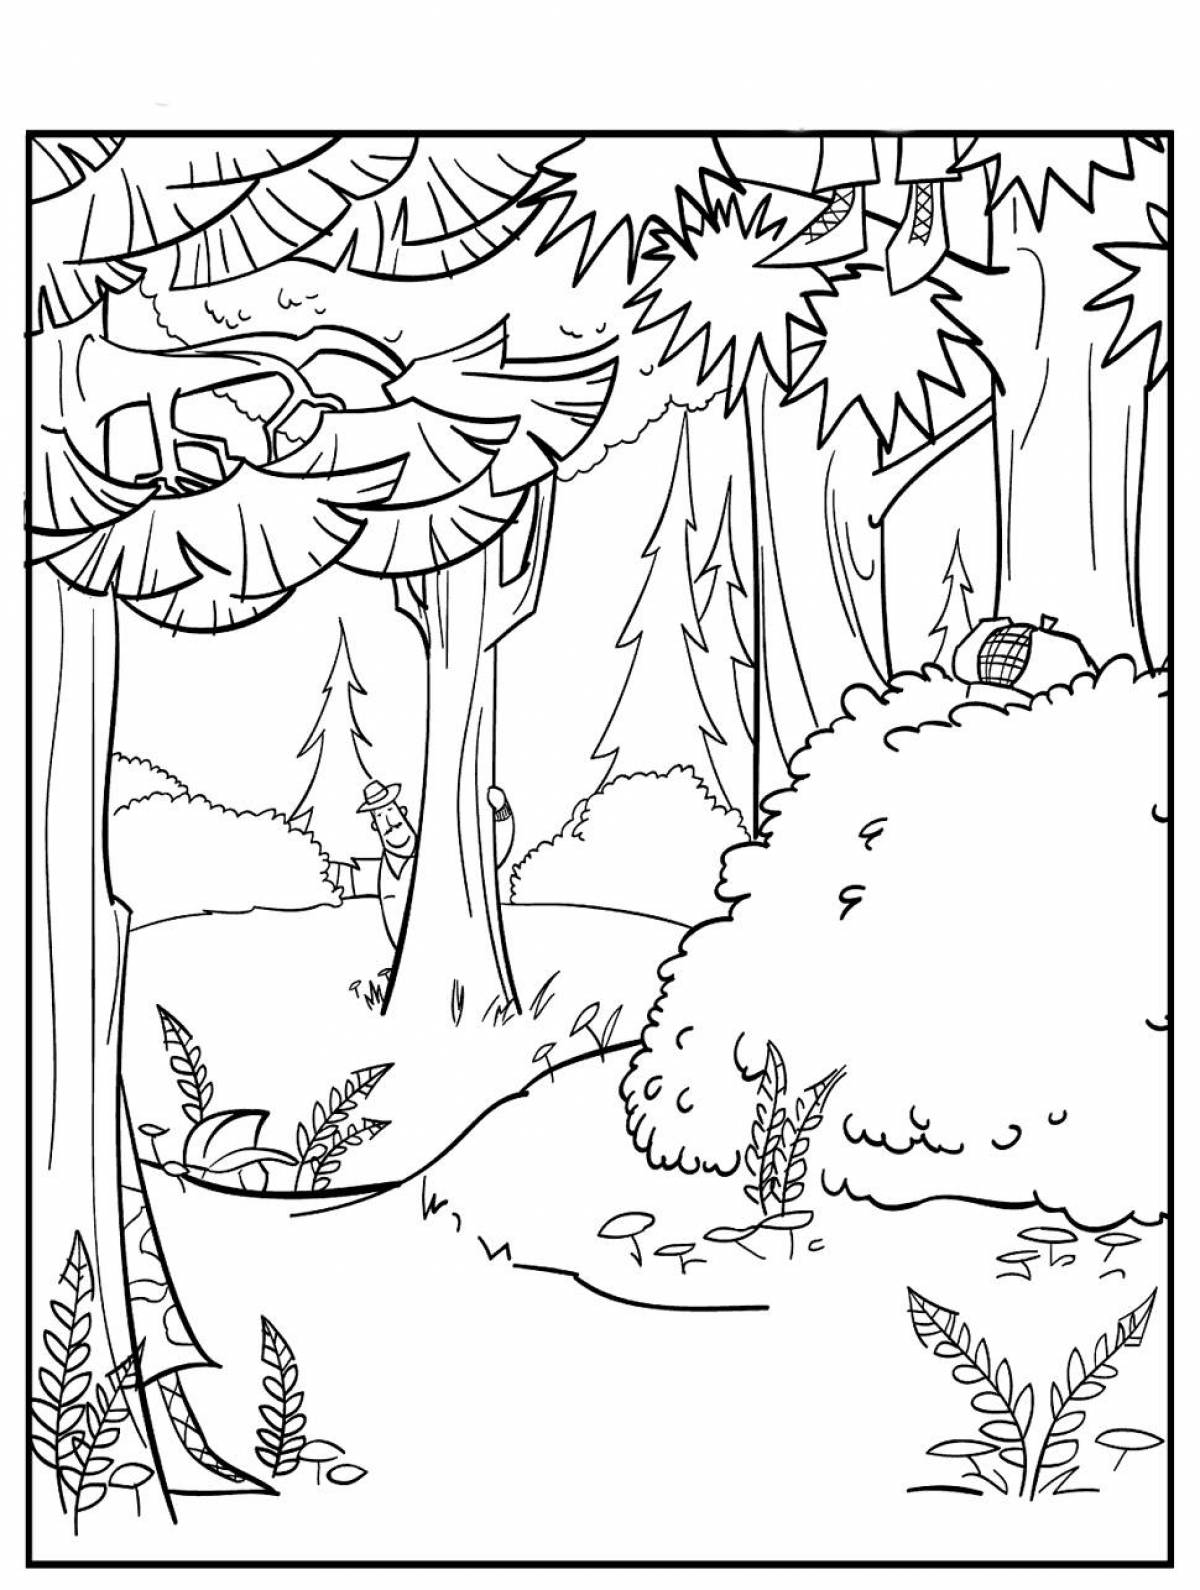 Bright forest coloring book for kids